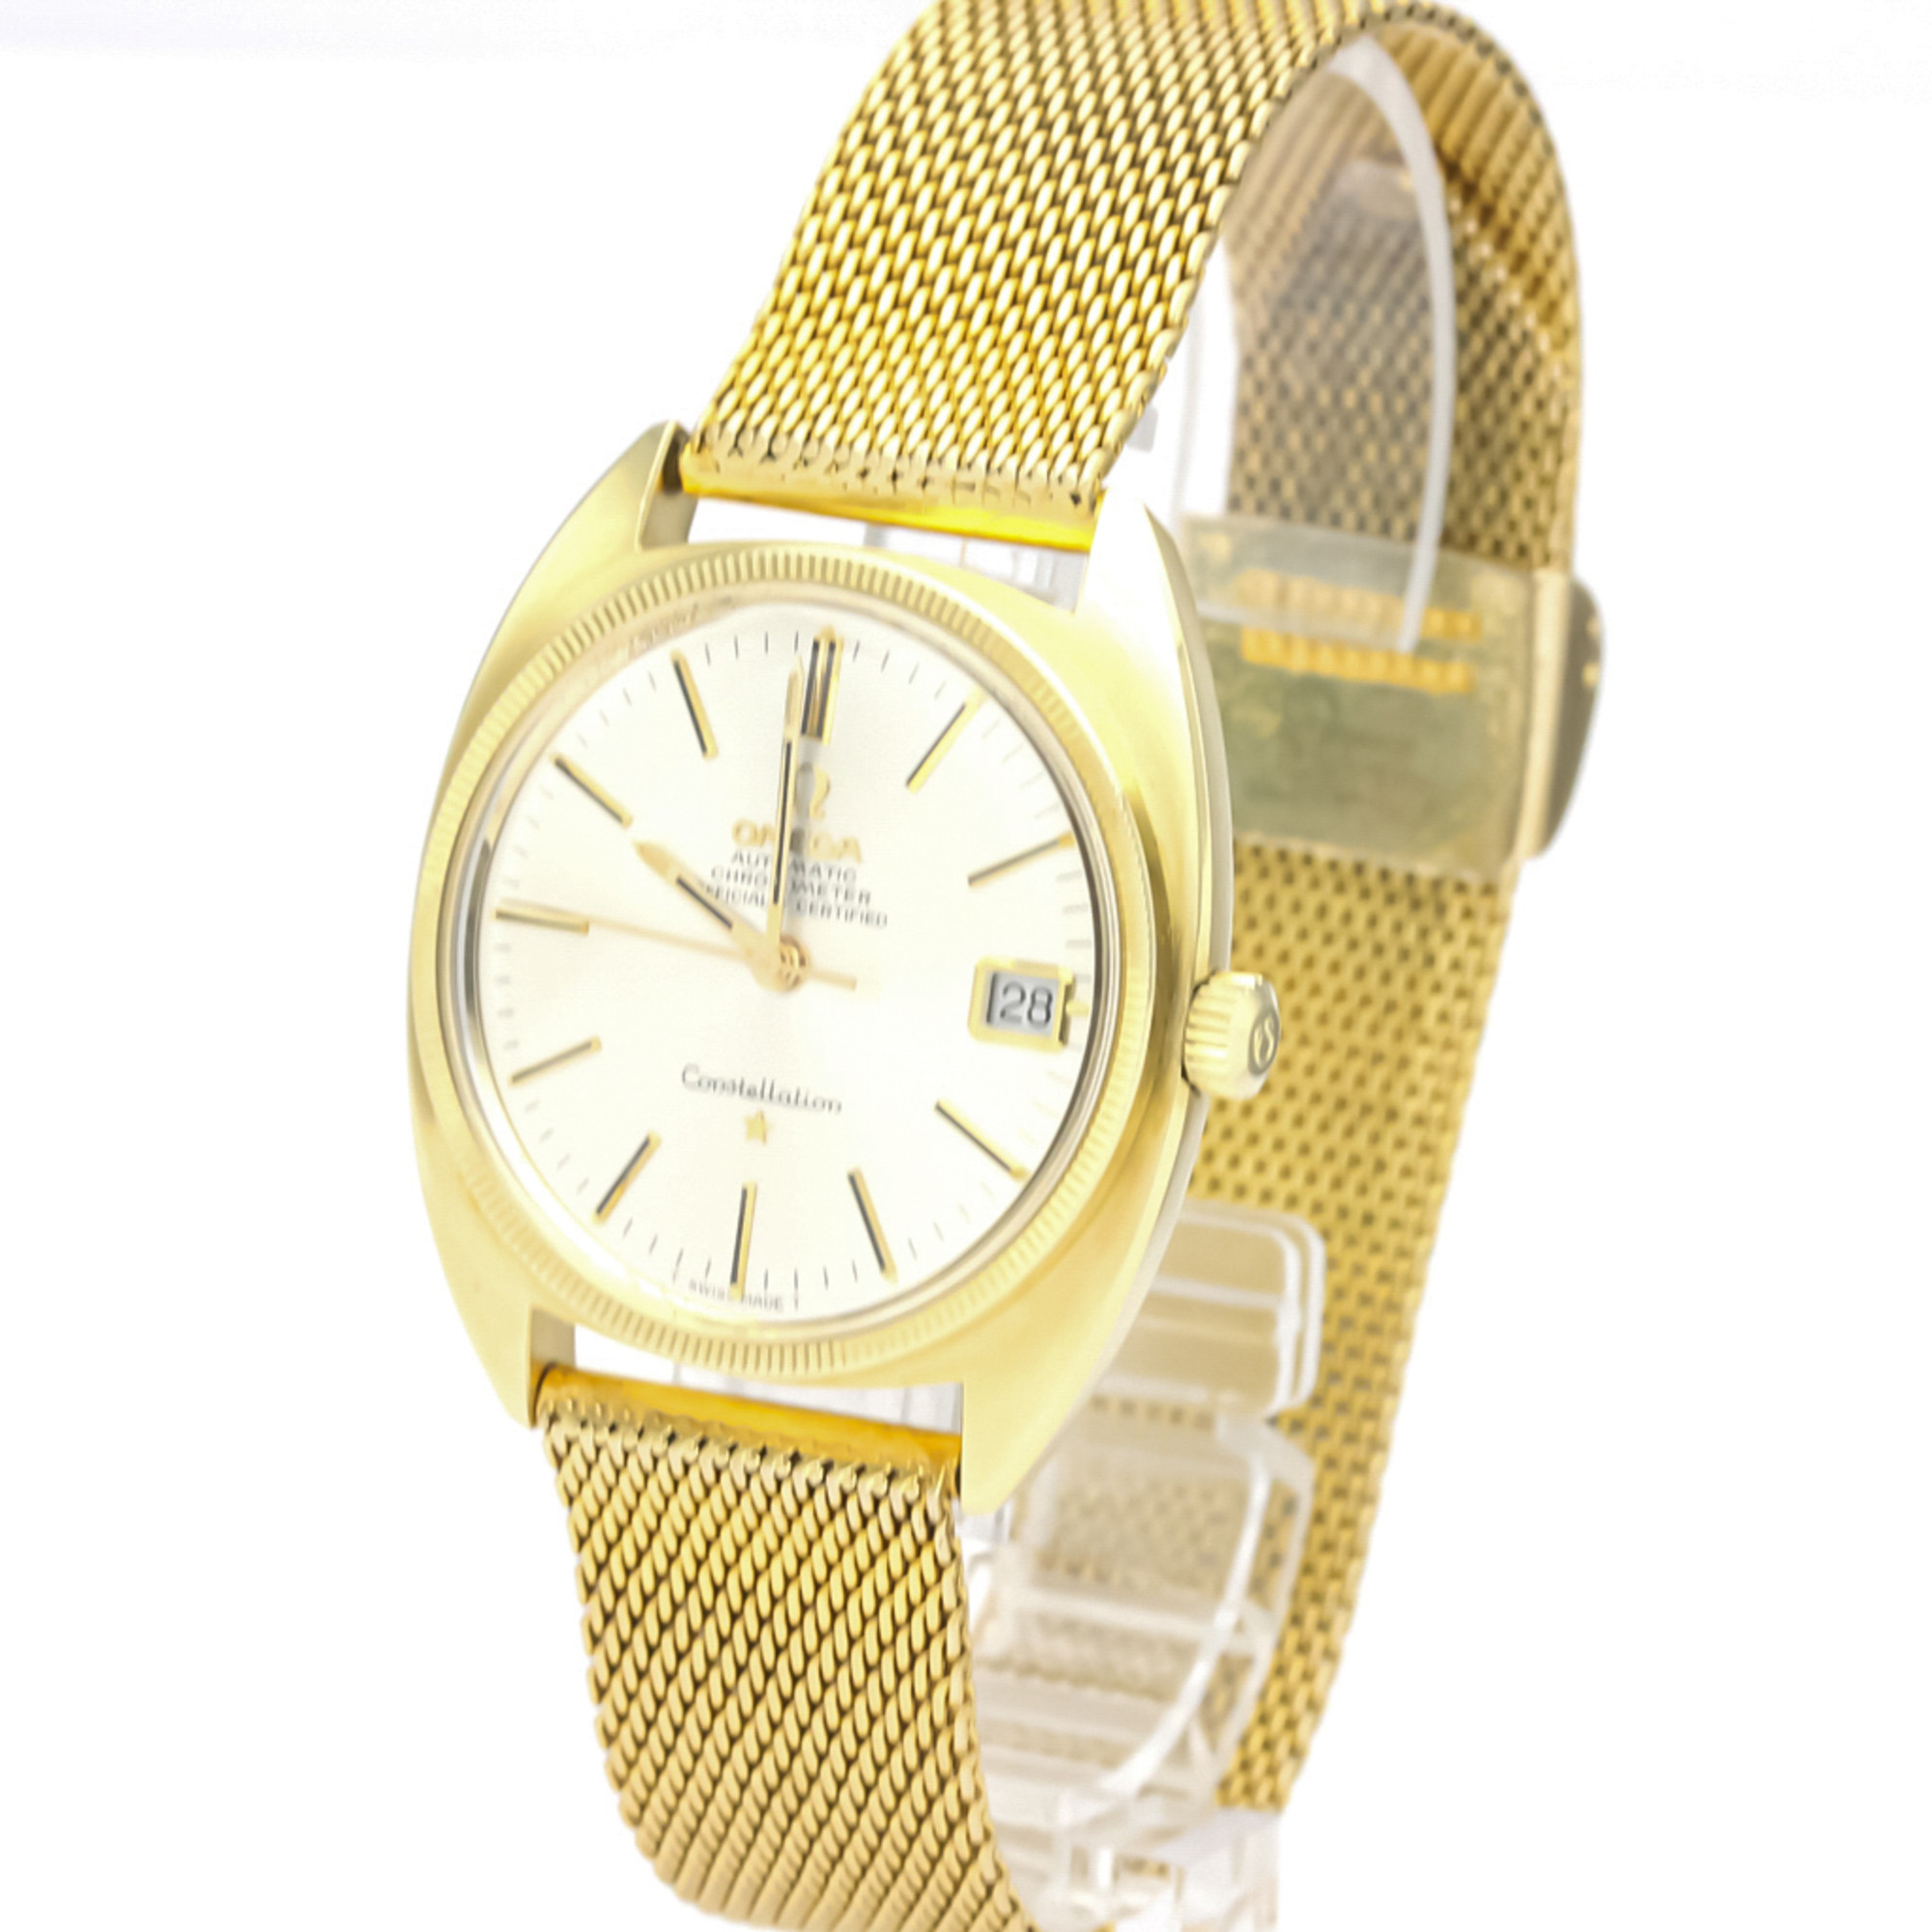 Omega Constellation Automatic Gold Plated Men's Dress Watch 168.027